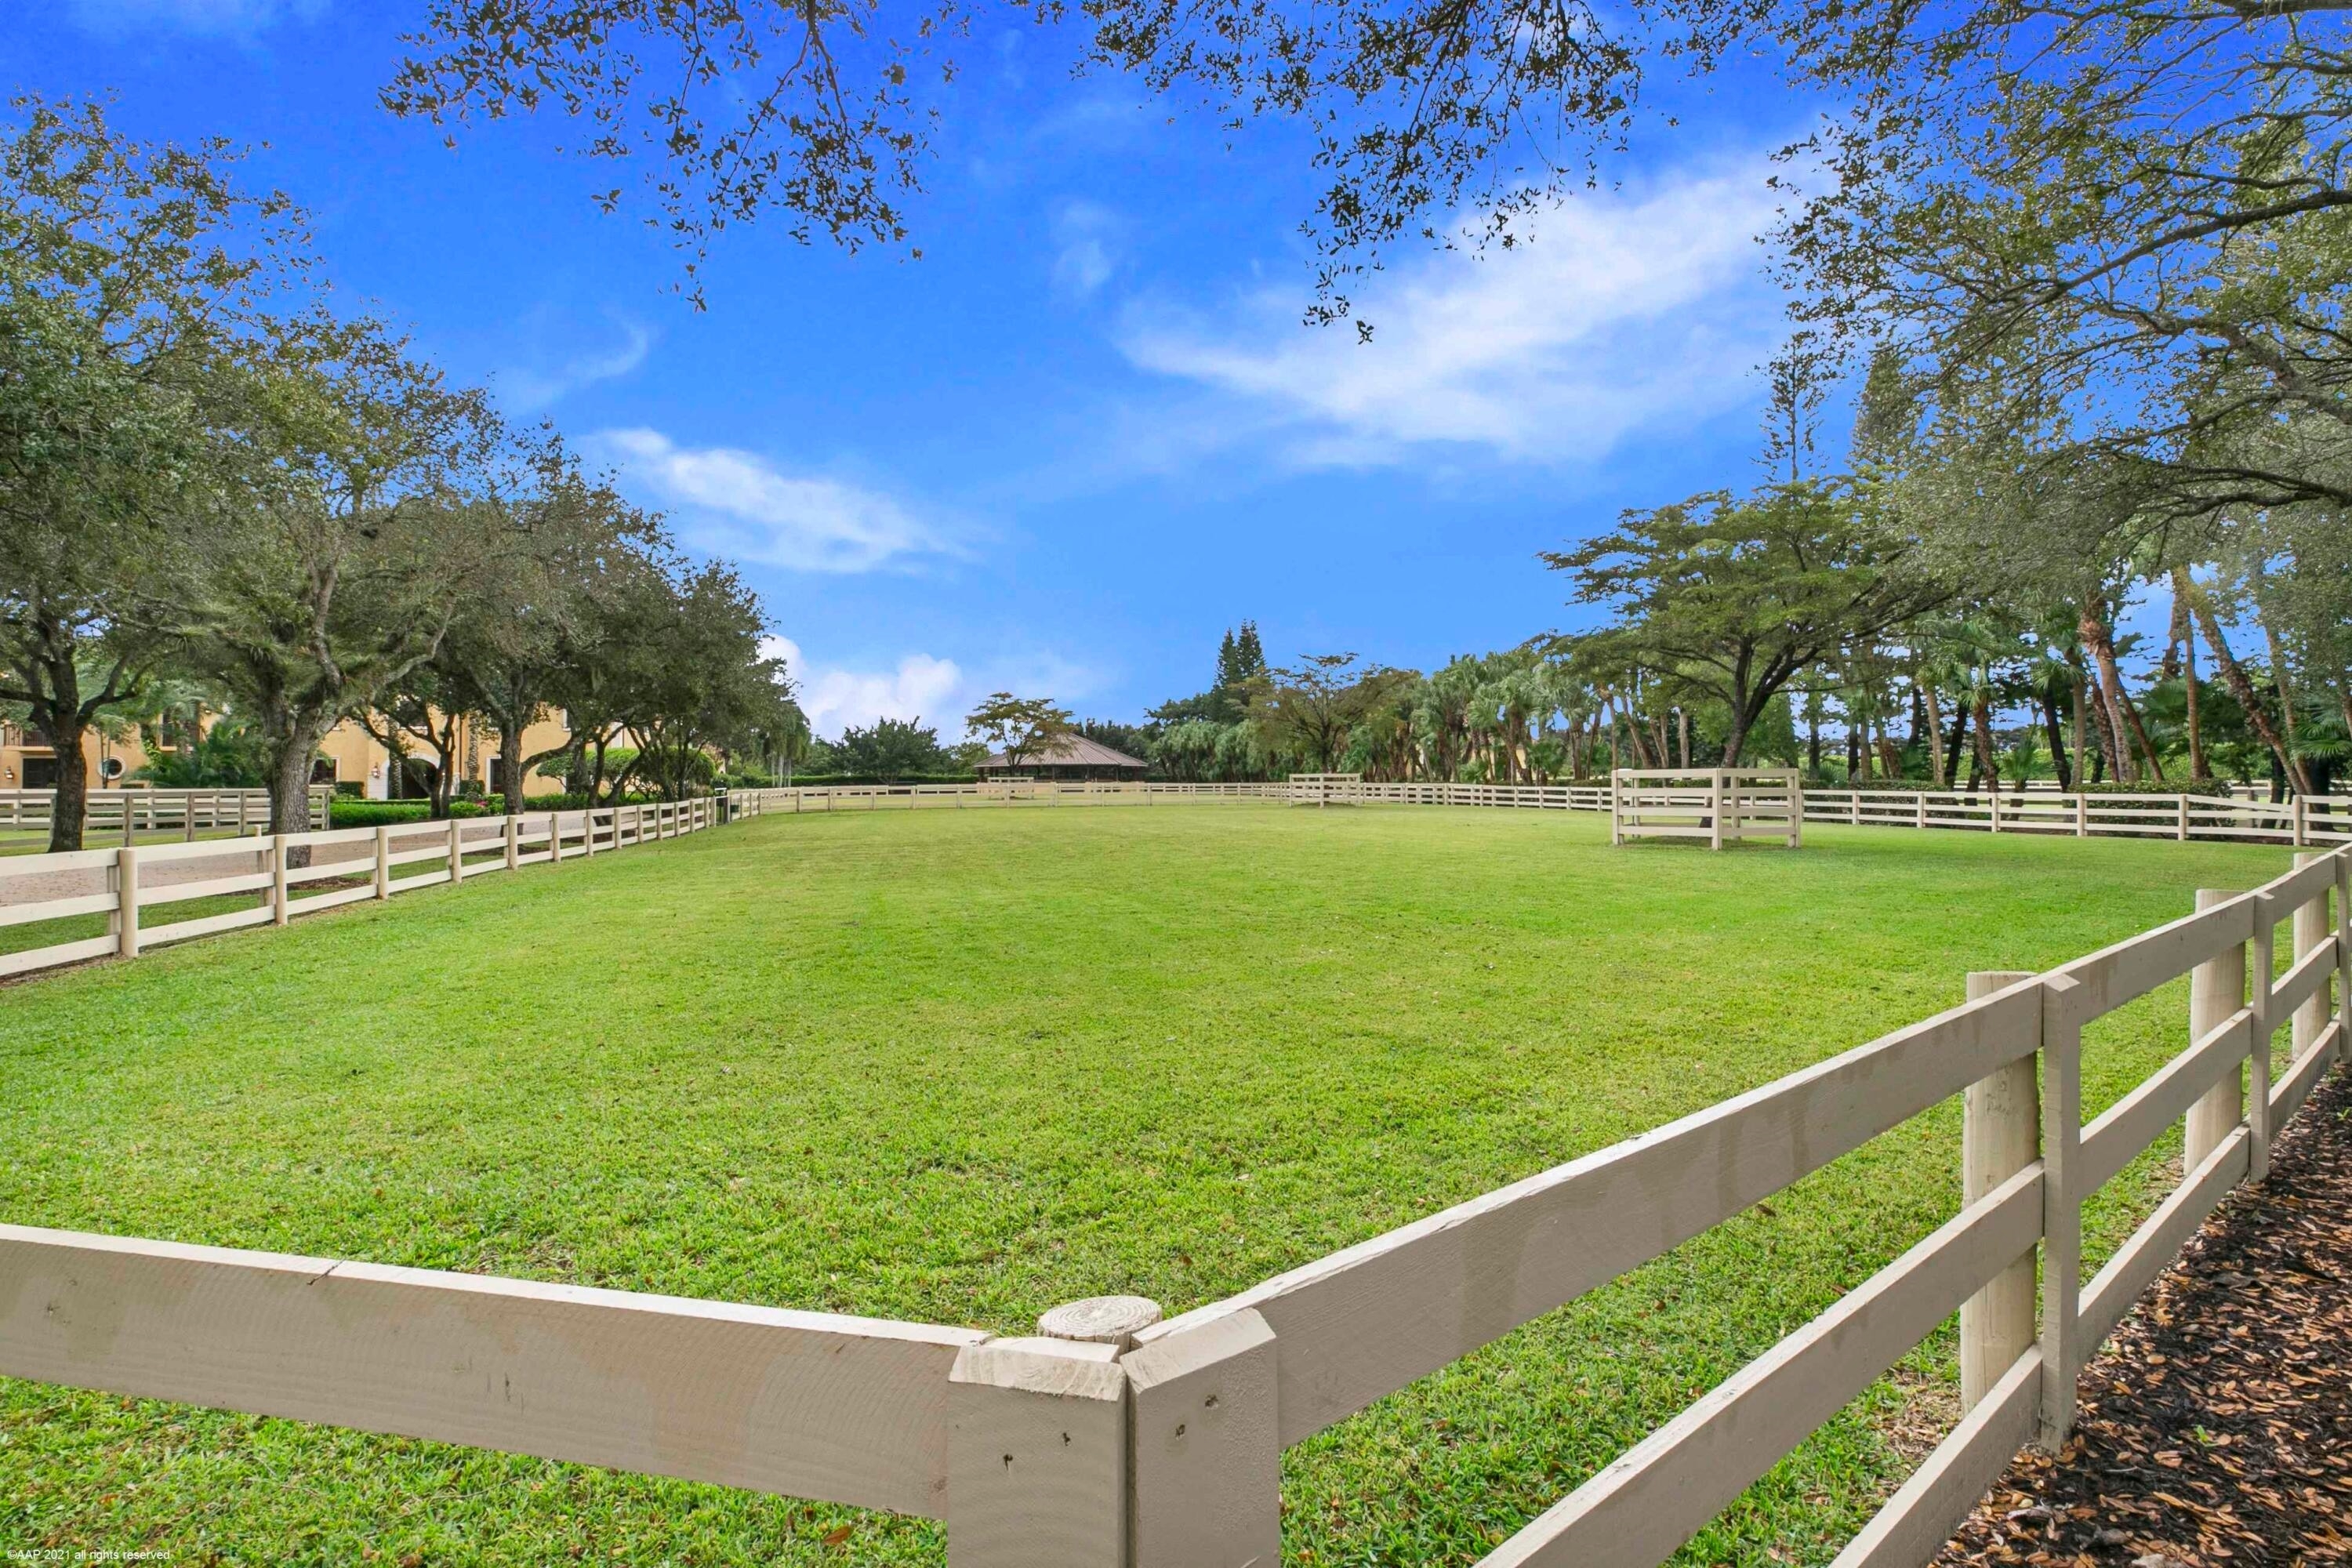 24. Farm and Ranch Properties for Sale at Wellington, FL 33414